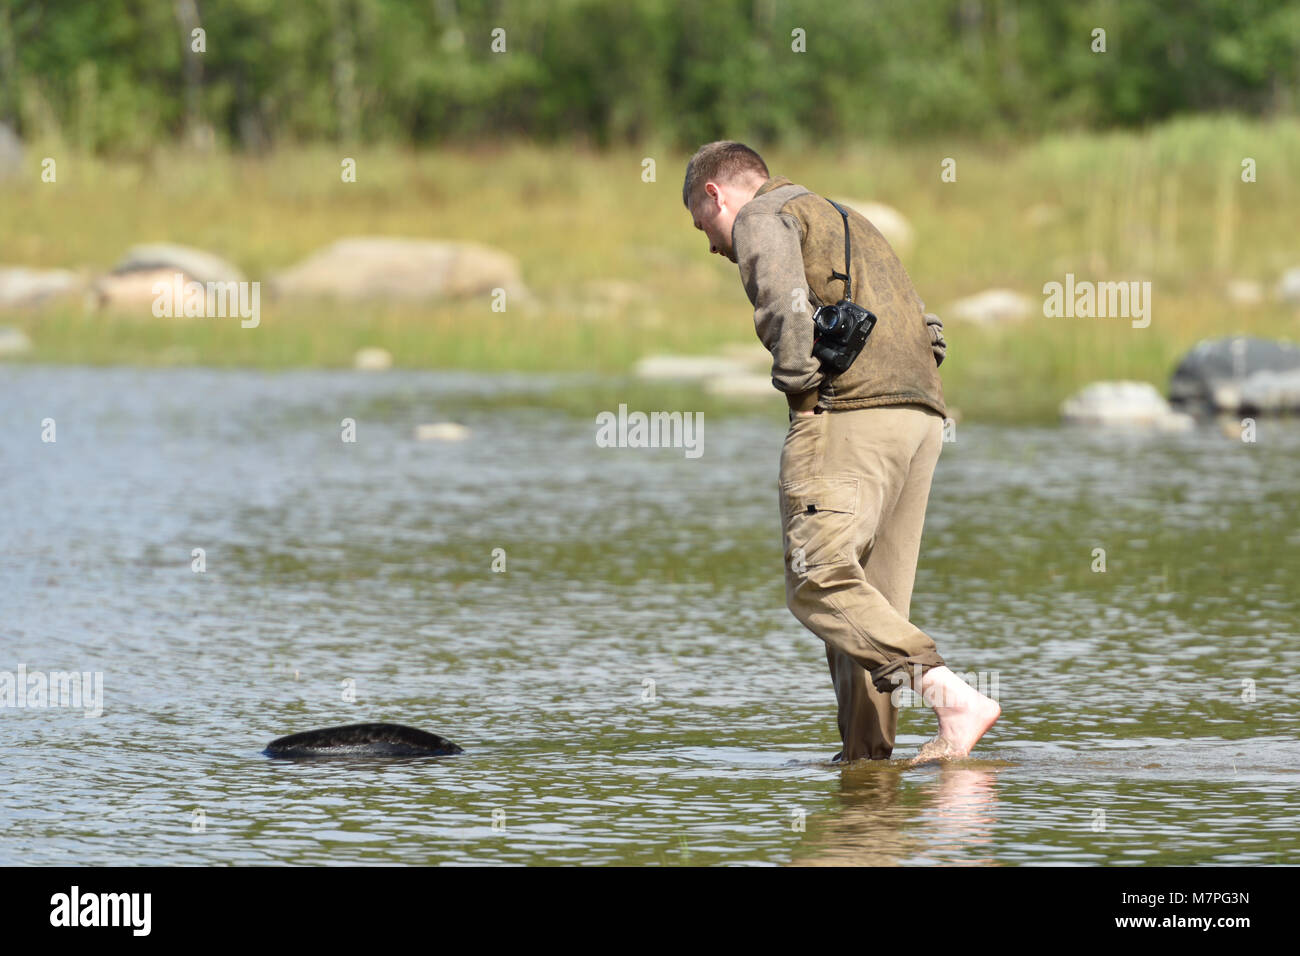 Valaam island, Russia - July 29, 2015: Vyacheslav Alekseev releases the Ladoga ringed seal into the lake Ladoga. Stock Photo